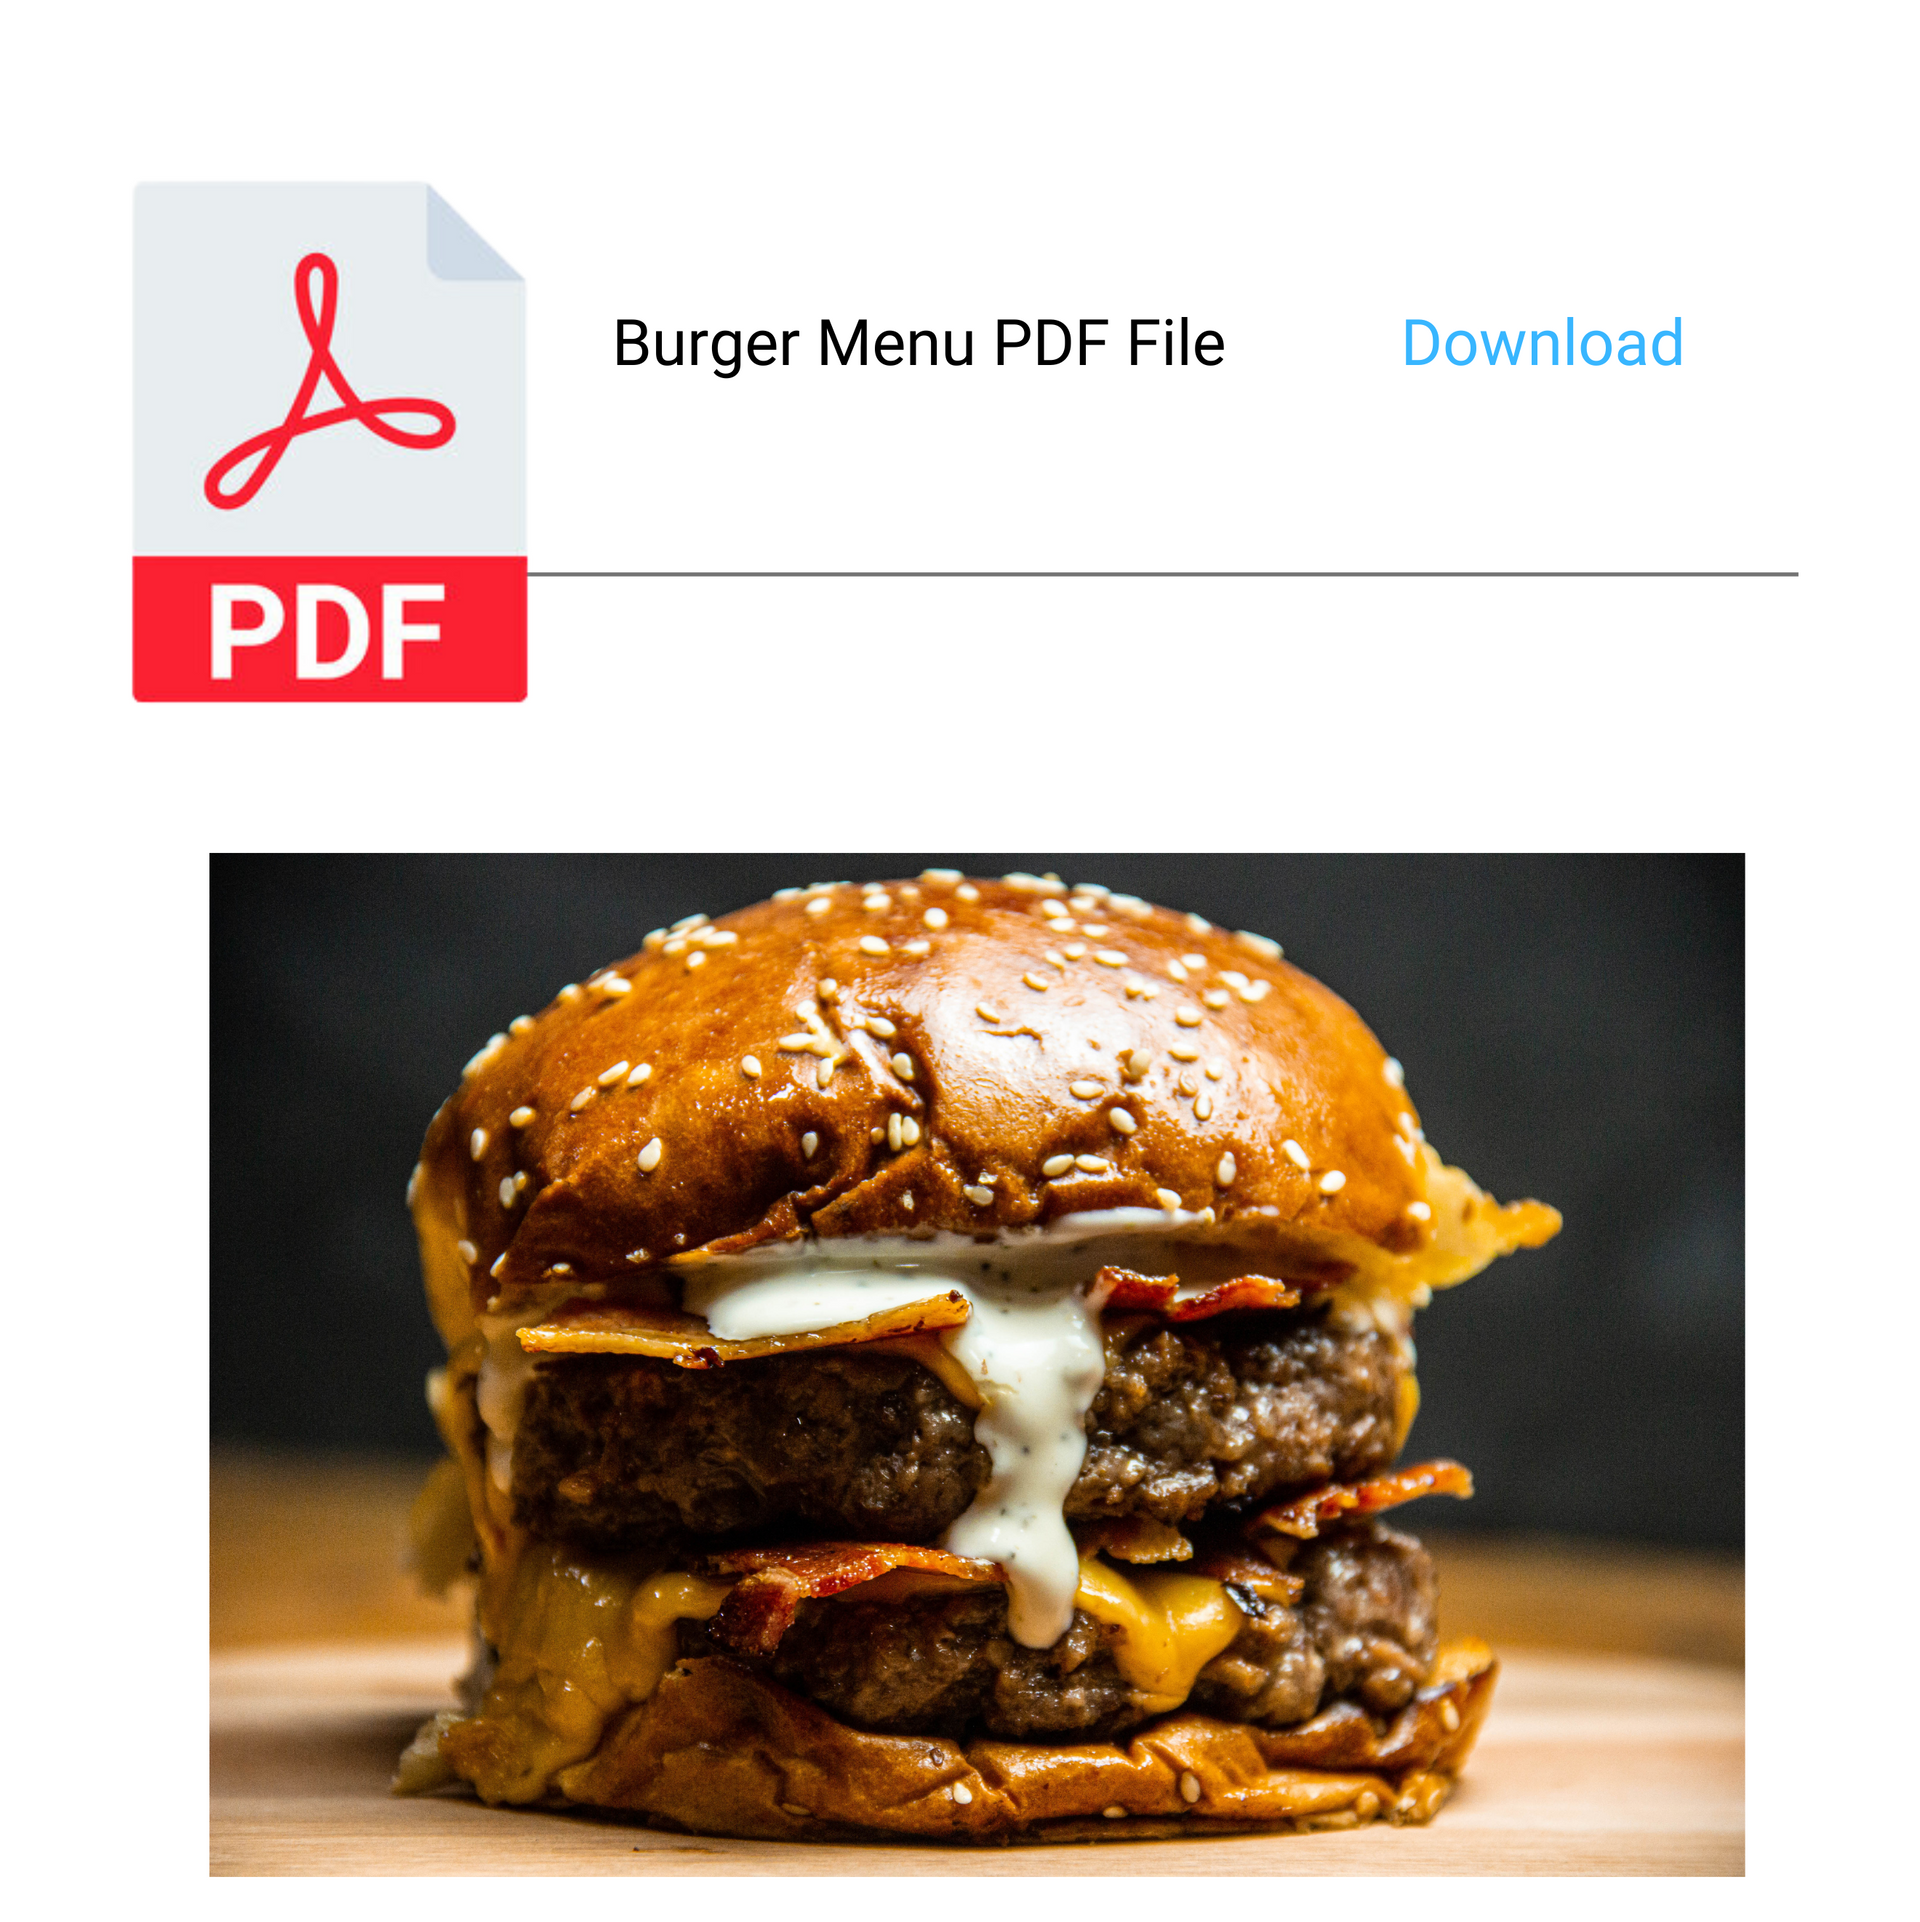 A pdf file for a burger menu with a picture of a hamburger